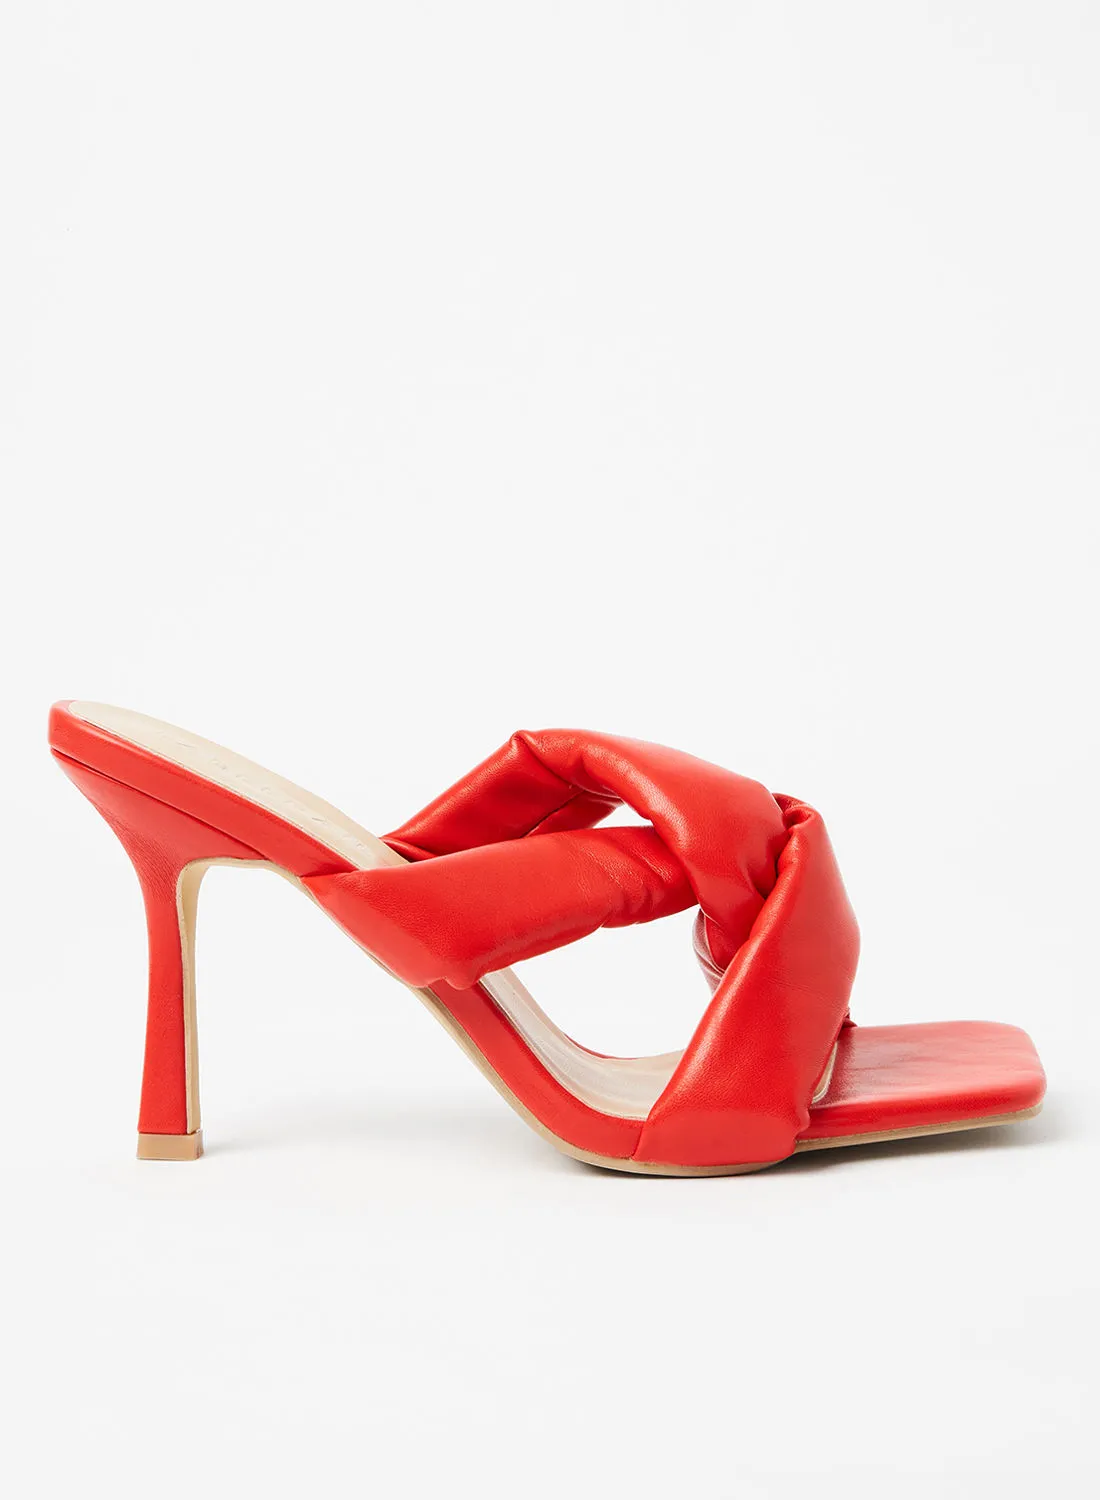 LABEL RAIL Knotted Strap Sandals Red